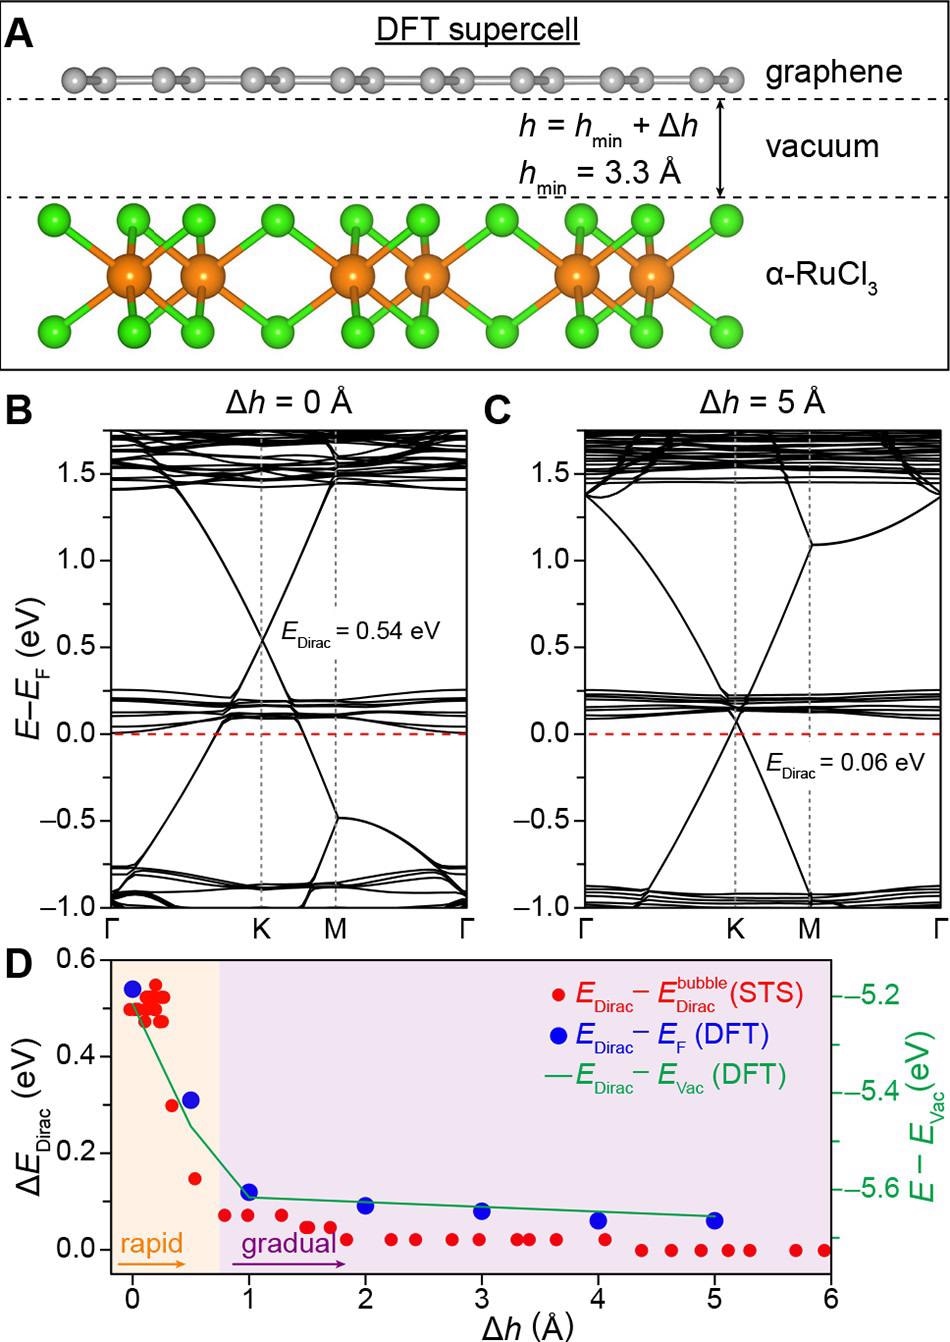 DFT and STM analysis of interlayer charge transfer in graphene/a-RuCl3 heterostructures. (A) Side-view of the graphene/a-RuCl3 heterostructure supercell used in DFT calculations. An equilibrium interlayer separation of hmin = 3.3 Å is used to model the so-called flat interface observed experimentally. To model the charge transfer behavior between graphene and a-RuCl3 at the edge of nanobubbles (where the interlayer separation increases gradually), additional calculations are performed using interlayer separations of ?h = h – hmin = 0.5, 1, 2, 3, 4, and 5 Å. Orange, green, and gray spheres indicate Ru, Cl, and C atoms, respectively. (B) DFT-calculated band structure for a graphene/a-RuCl3 heterostructure with maximal charge transfer (i.e., h = hmin = 3.3 Å). (C) Band structure for graphene/a-RuCl3 heterostructure with h = hmin + 5 Å, showing minimal interlayer charge transfer. The Fermi levels are set to zero in (B,C). (D) The shift in EDirac relative to its value on the nanobubble plotted as a function of interlayer separation is plotted for both experimental (red dots) and theoretical (blue dots) data. The shift in EDirac relative to the vacuum energy EVac is plotted with a green curve. The rapid decay in interlayer charge transfer is highlighted in orange, while the subsequent gradual decay is highlighted in purple.